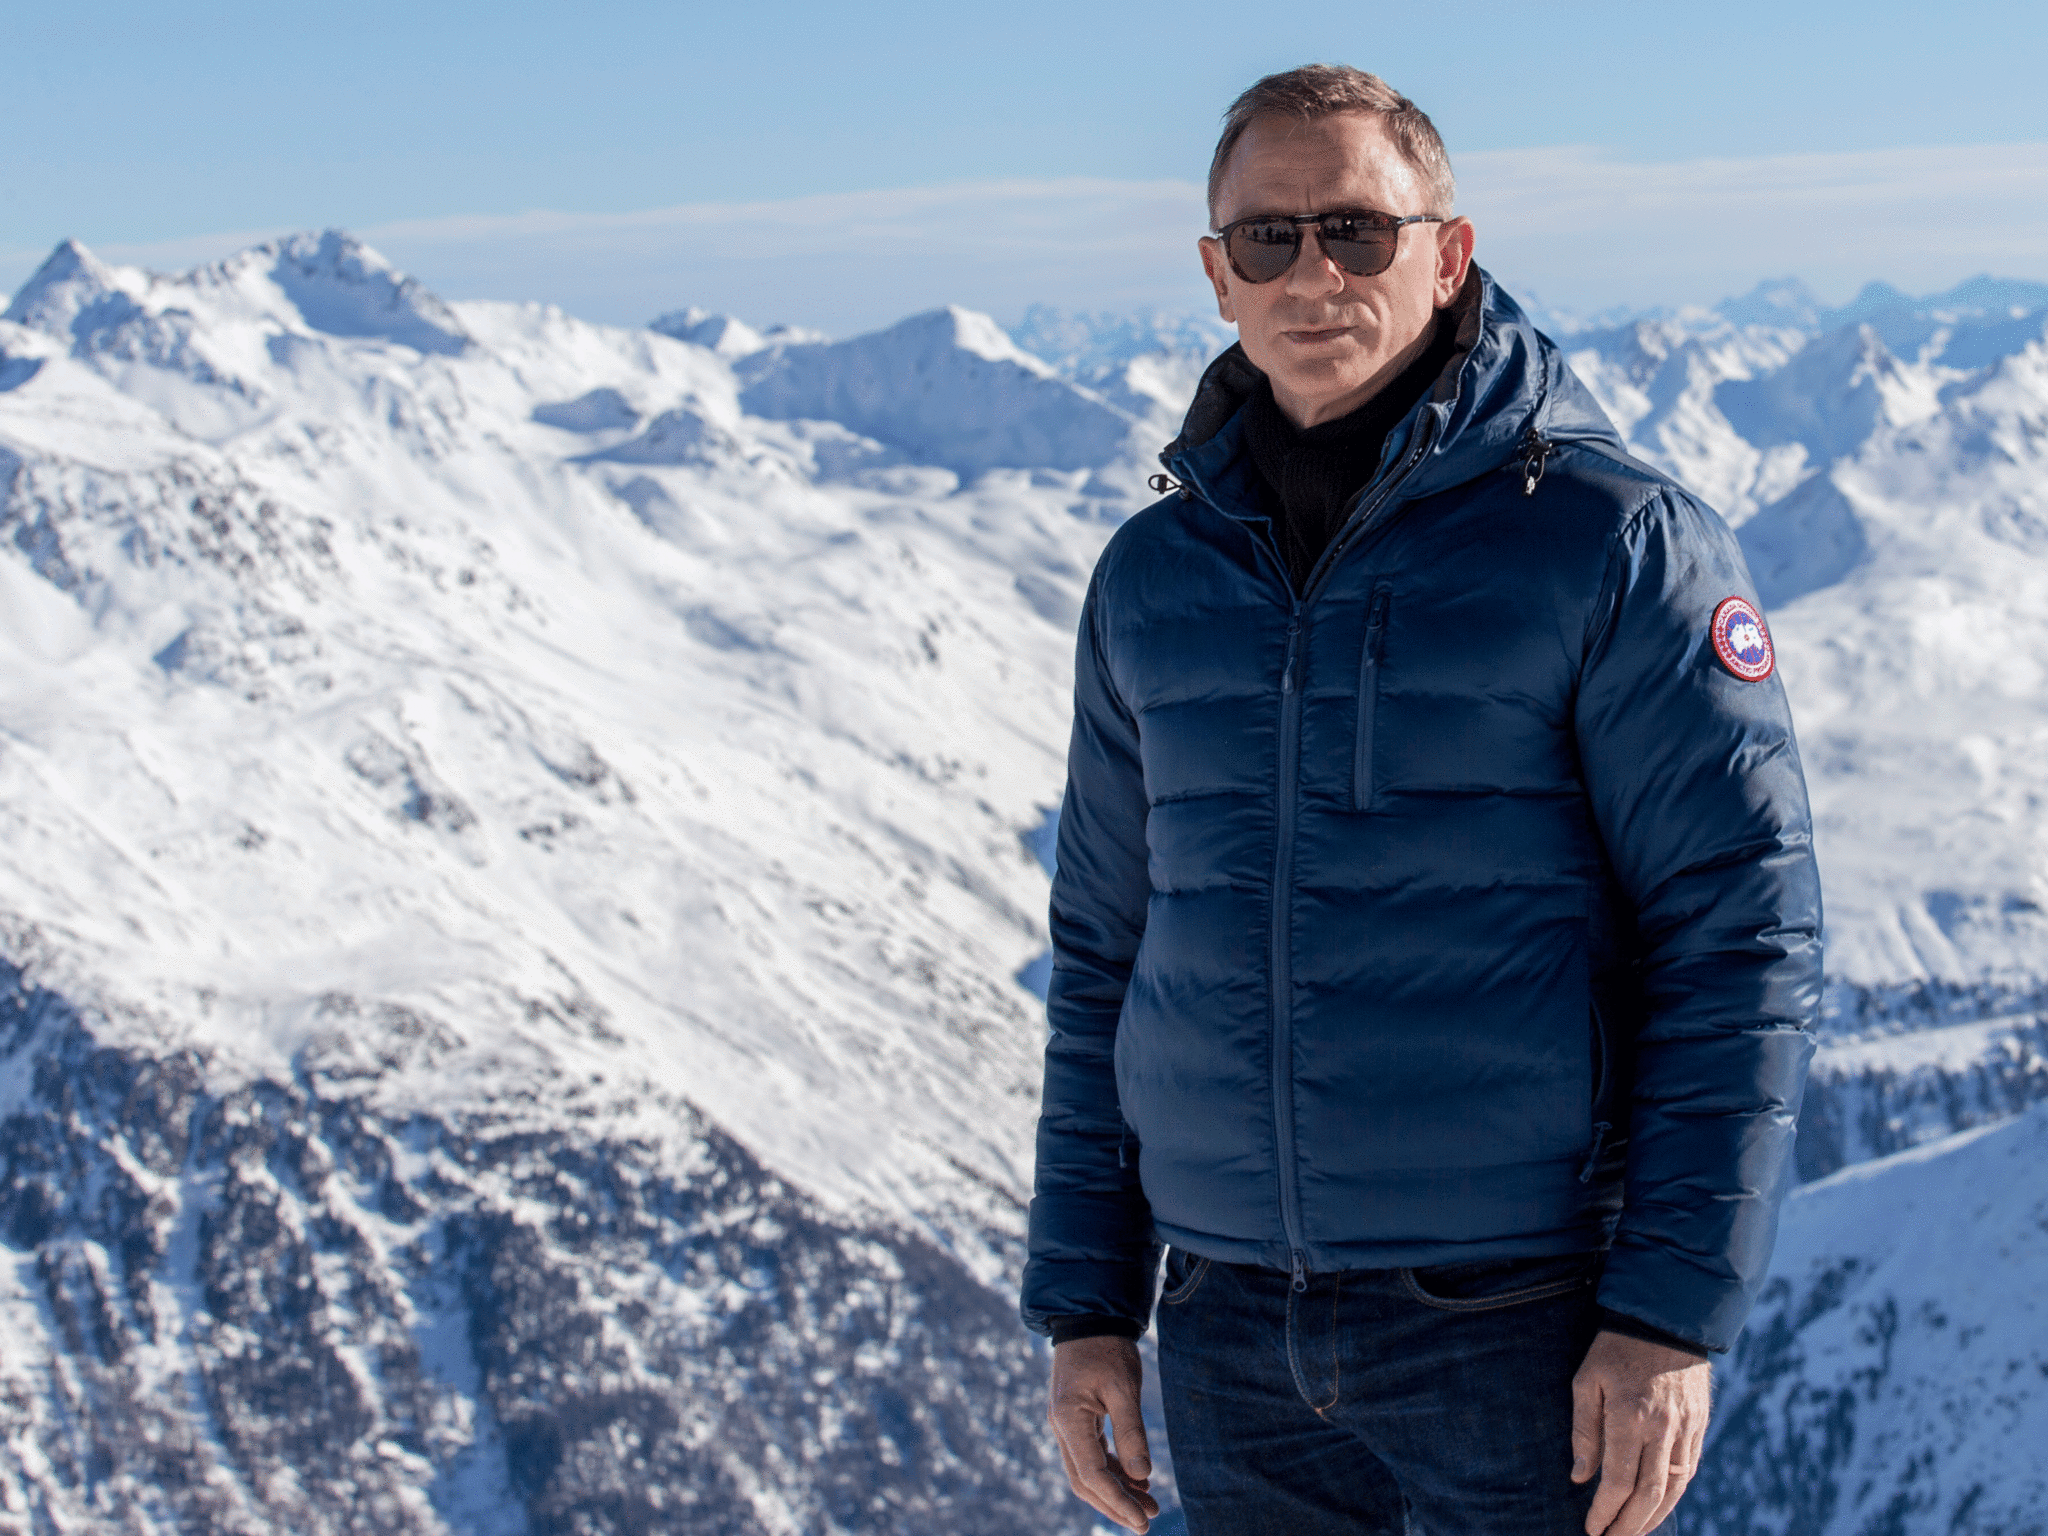 Could James Bond be saving the Earth's glaciers in his electric Aston Martin one day?